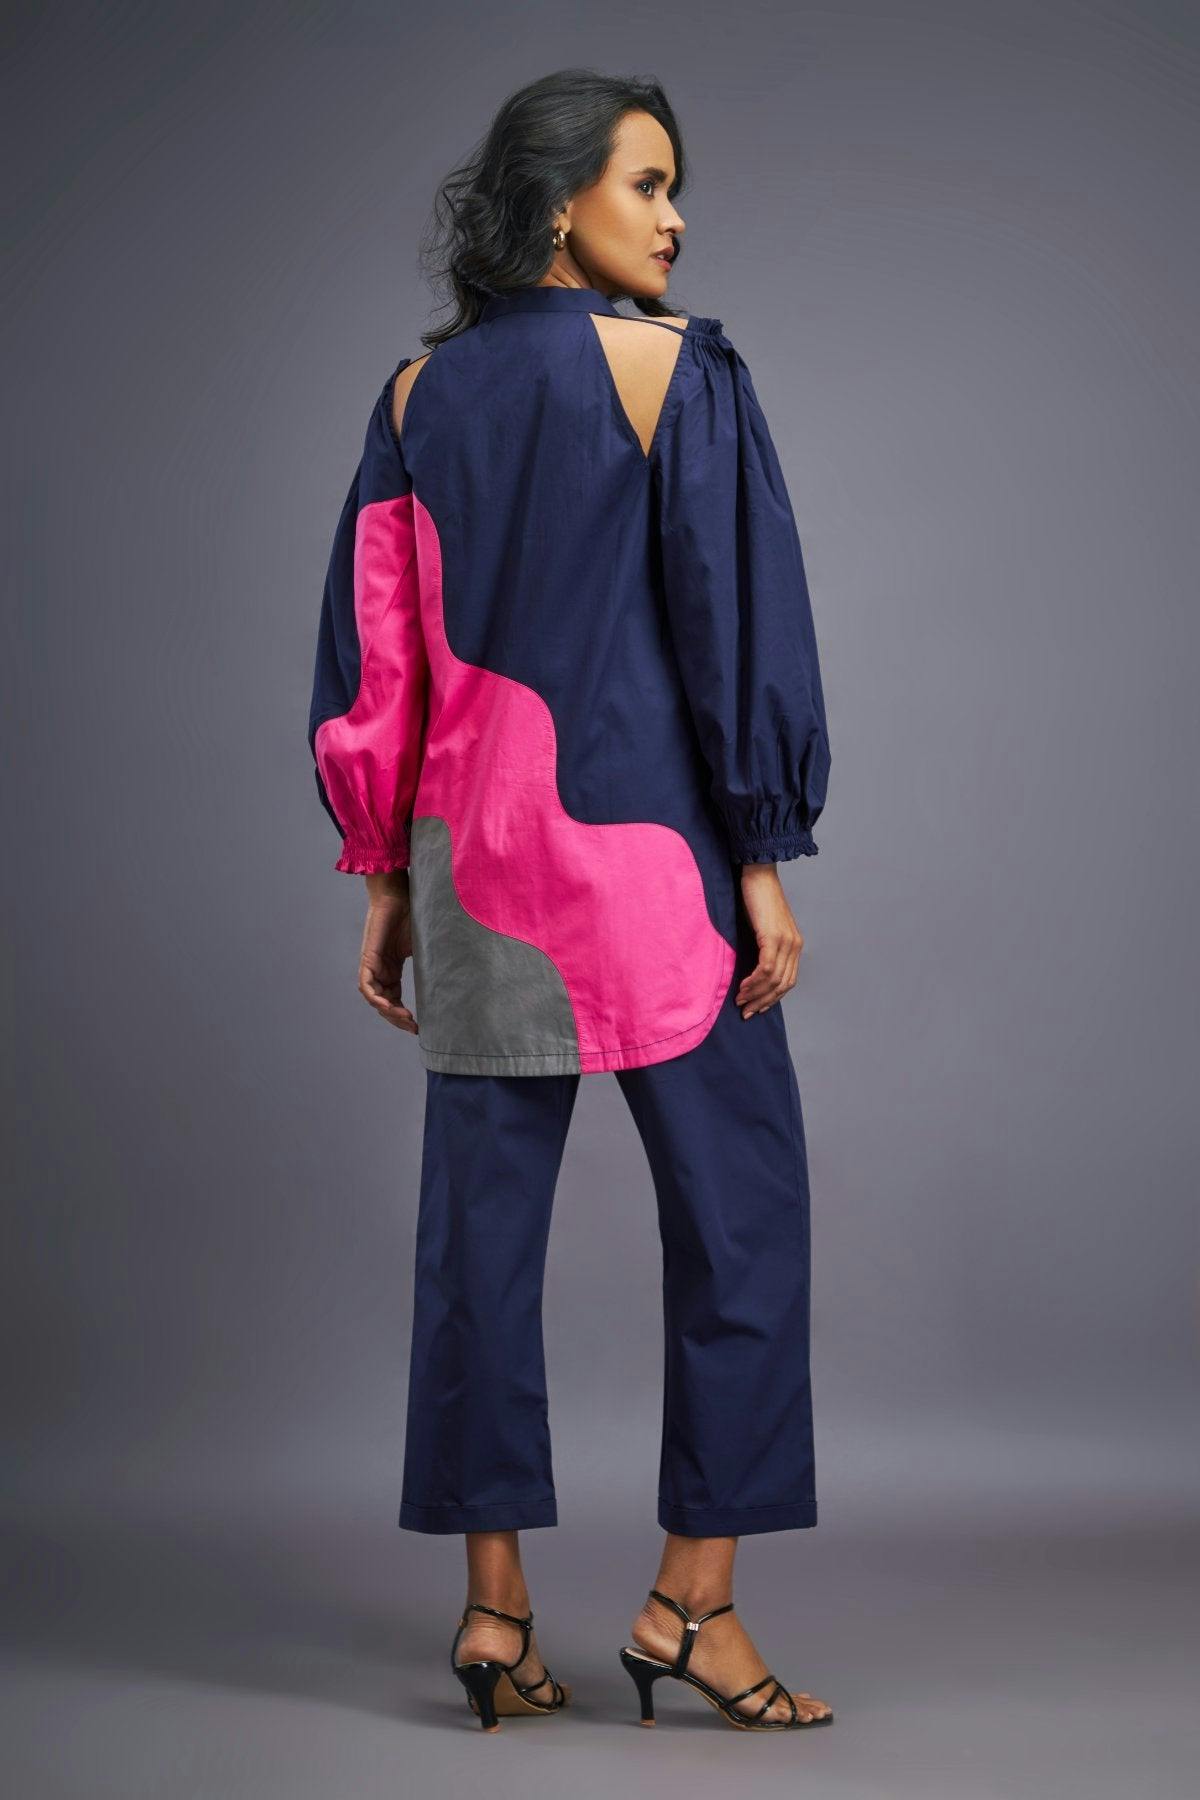 Thumbnail preview #4 for BB-1112-PG-T - Navy Blue Pink Shirt With Shoulder Cut Detail